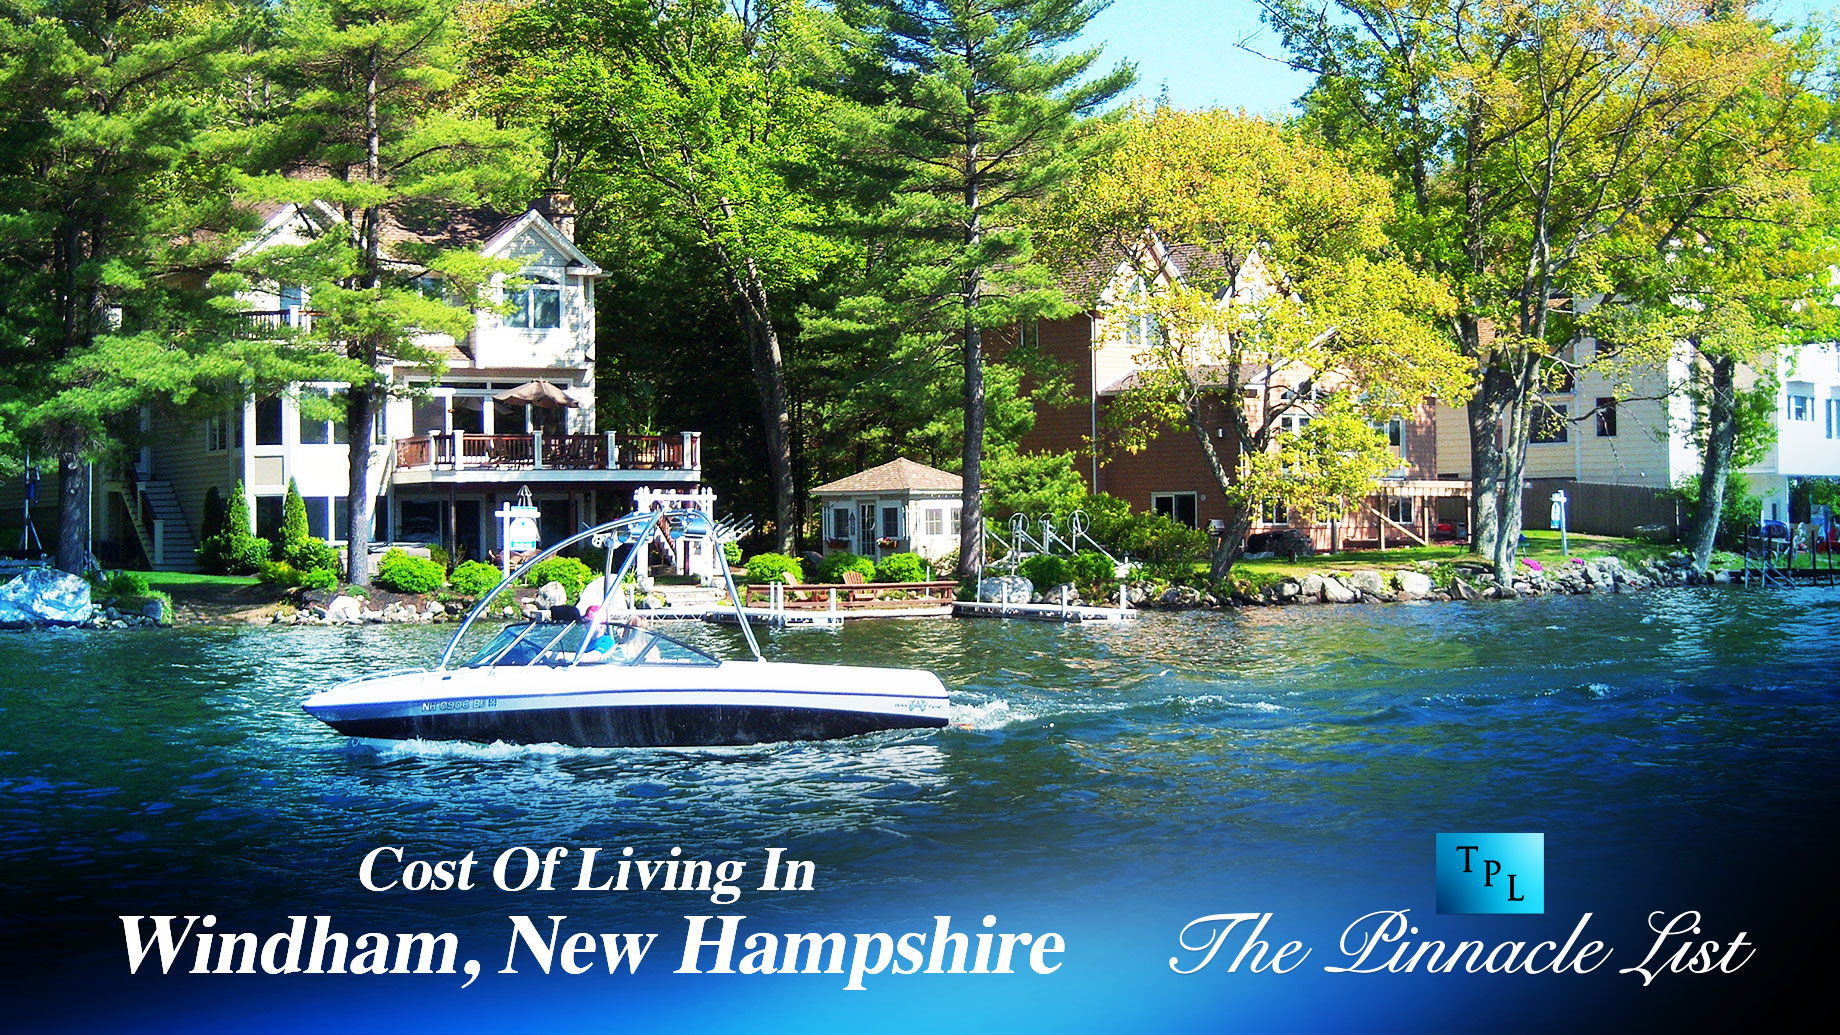 Cost Of Living In Windham, New Hampshire